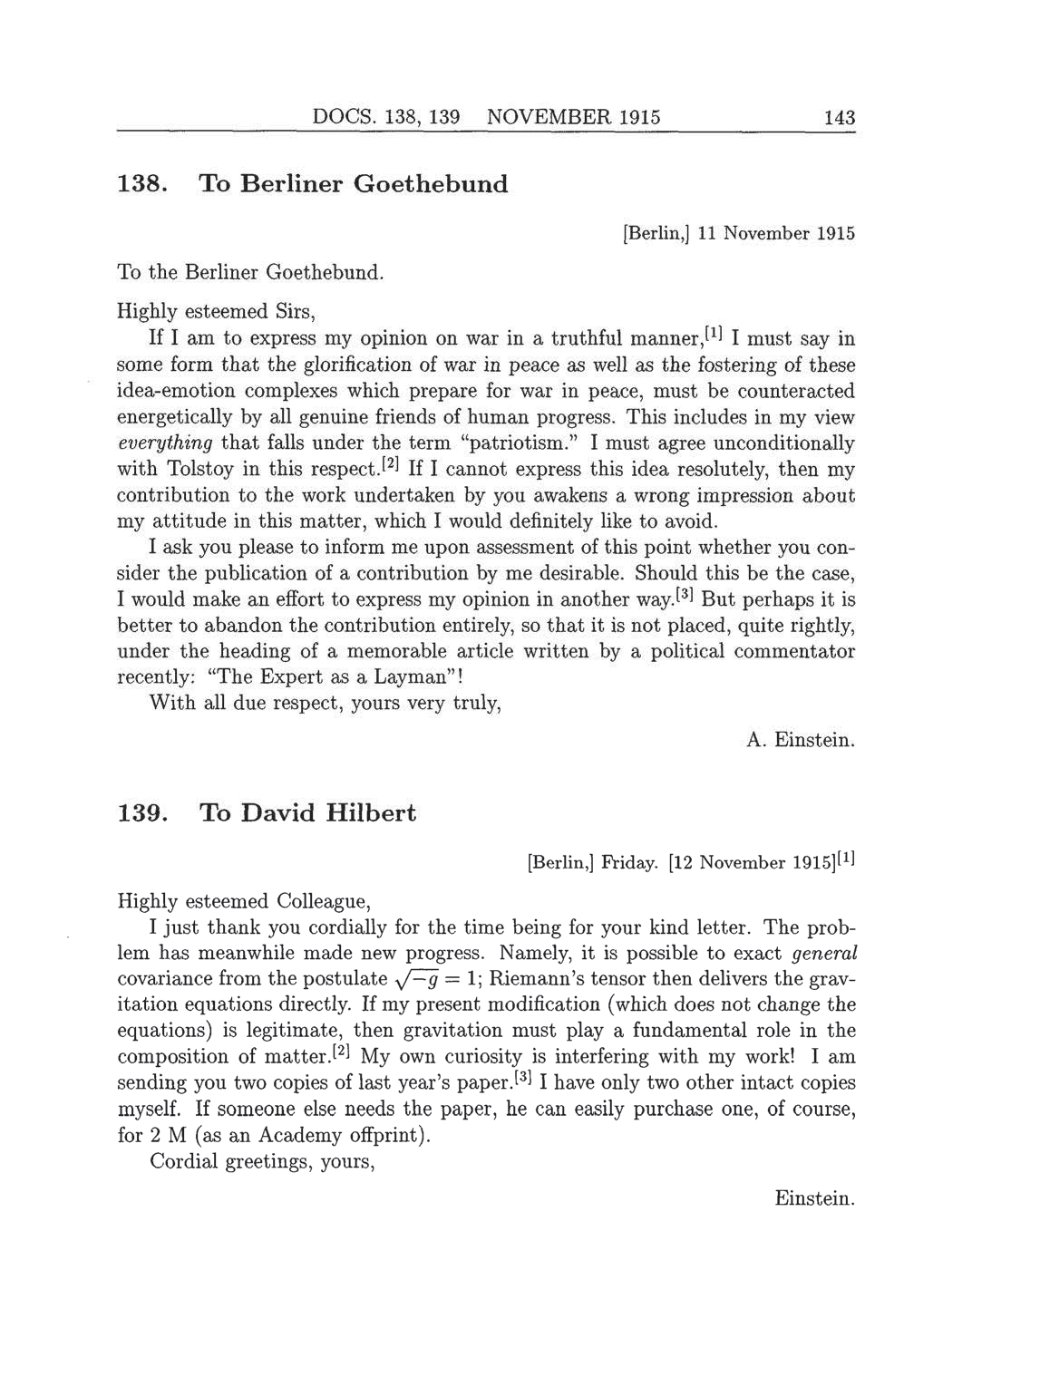 Volume 8: The Berlin Years: Correspondence, 1914-1918 (English translation supplement) page 143